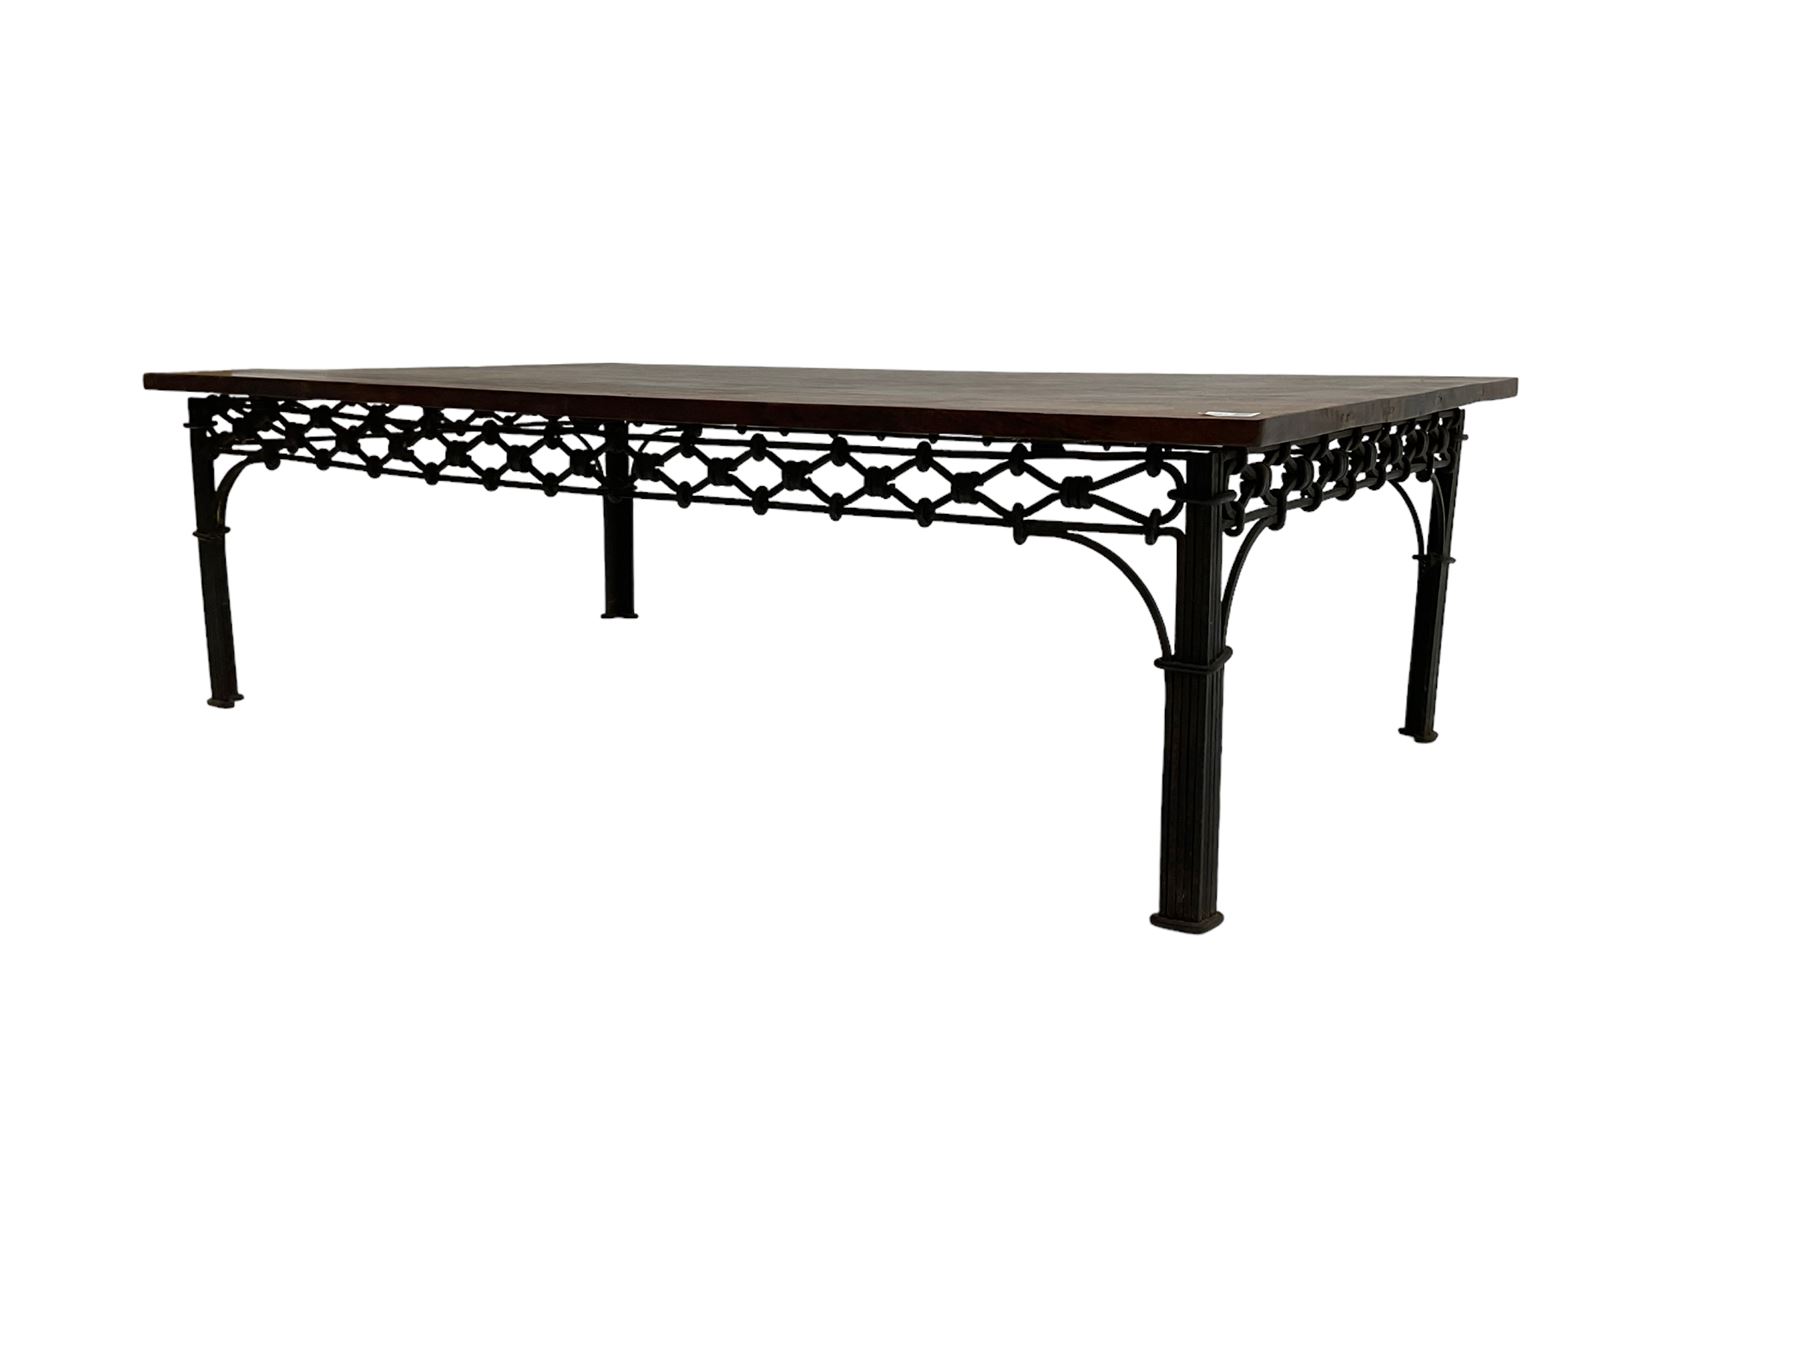 Laura Ashley - mango wood and wrought iron coffee table - Image 8 of 8